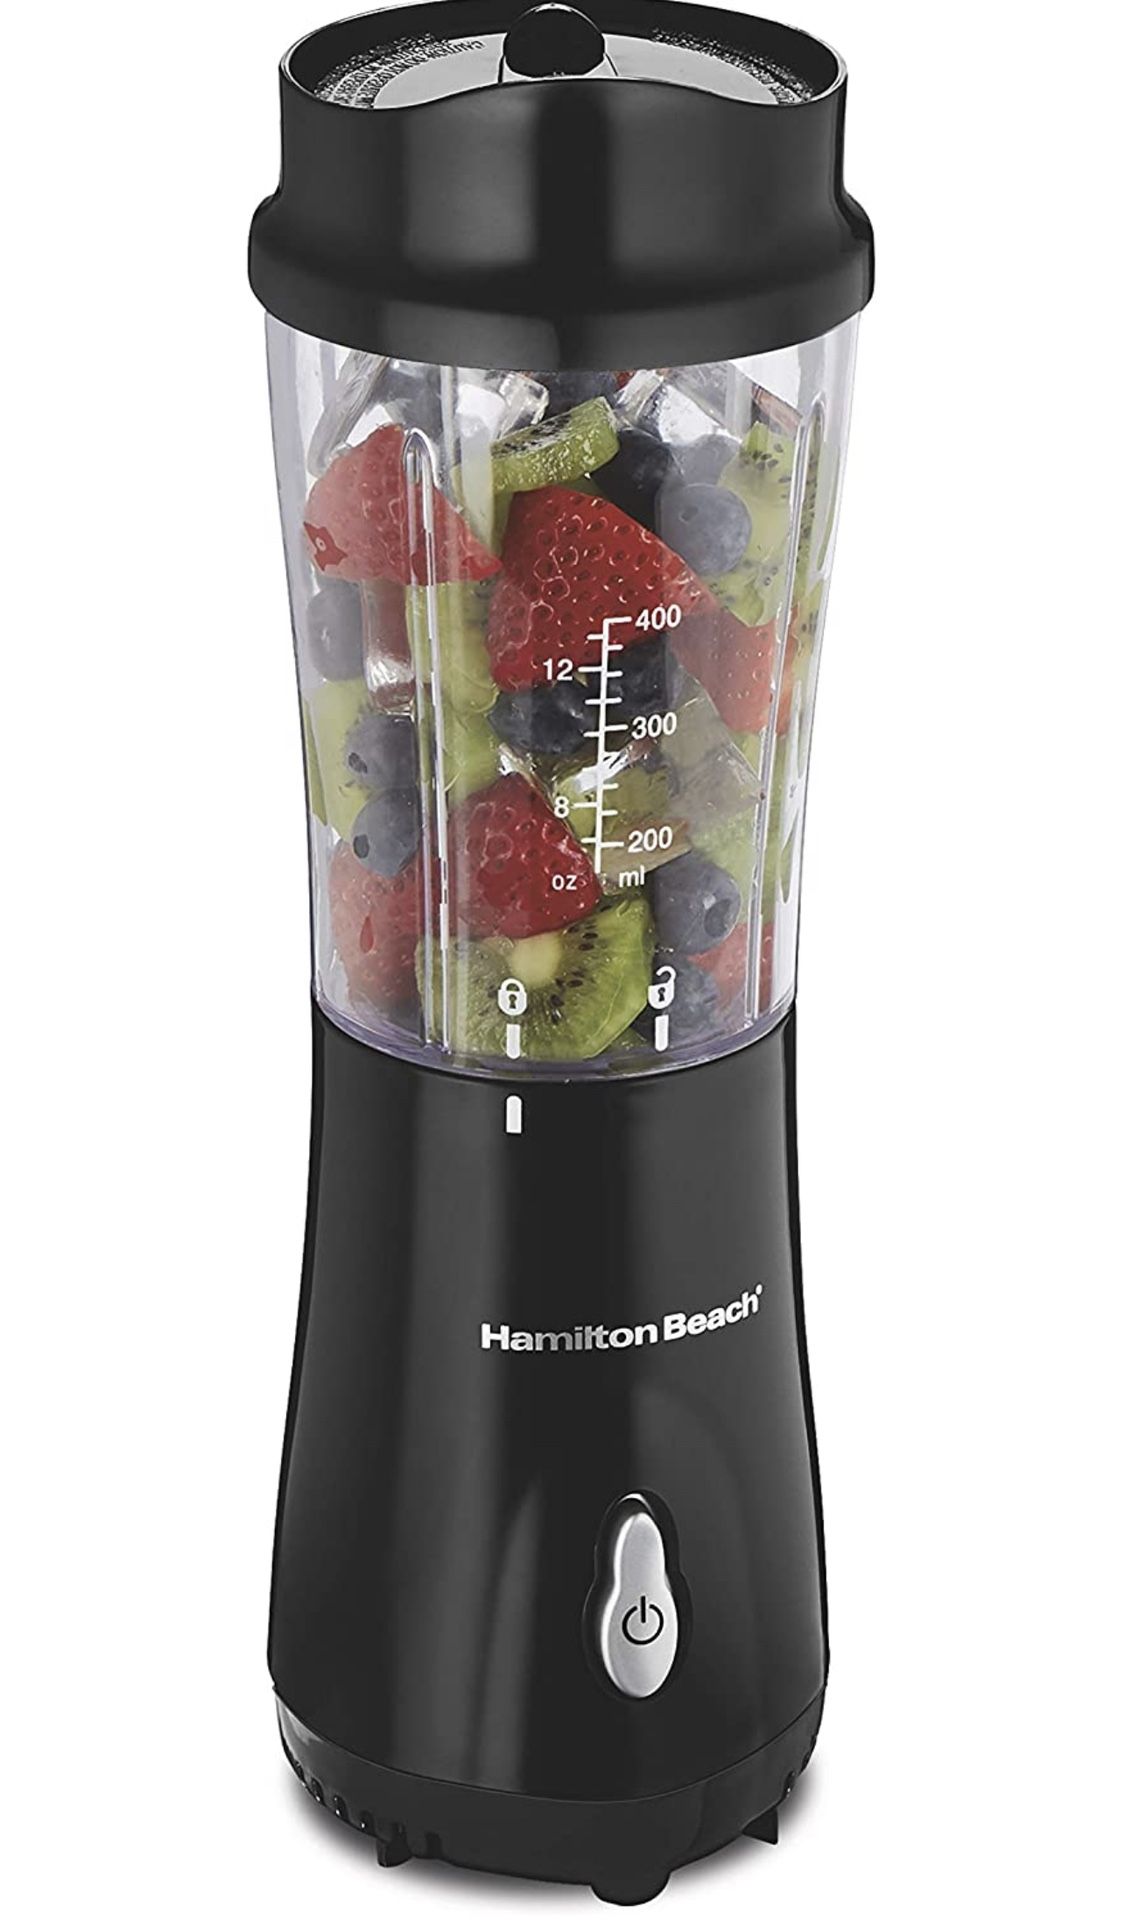 Hamilton Beach Personal Blender for Shakes and Smoothies with 14oz Travel Cup and Lid, Black (51101AV) $10 Firm